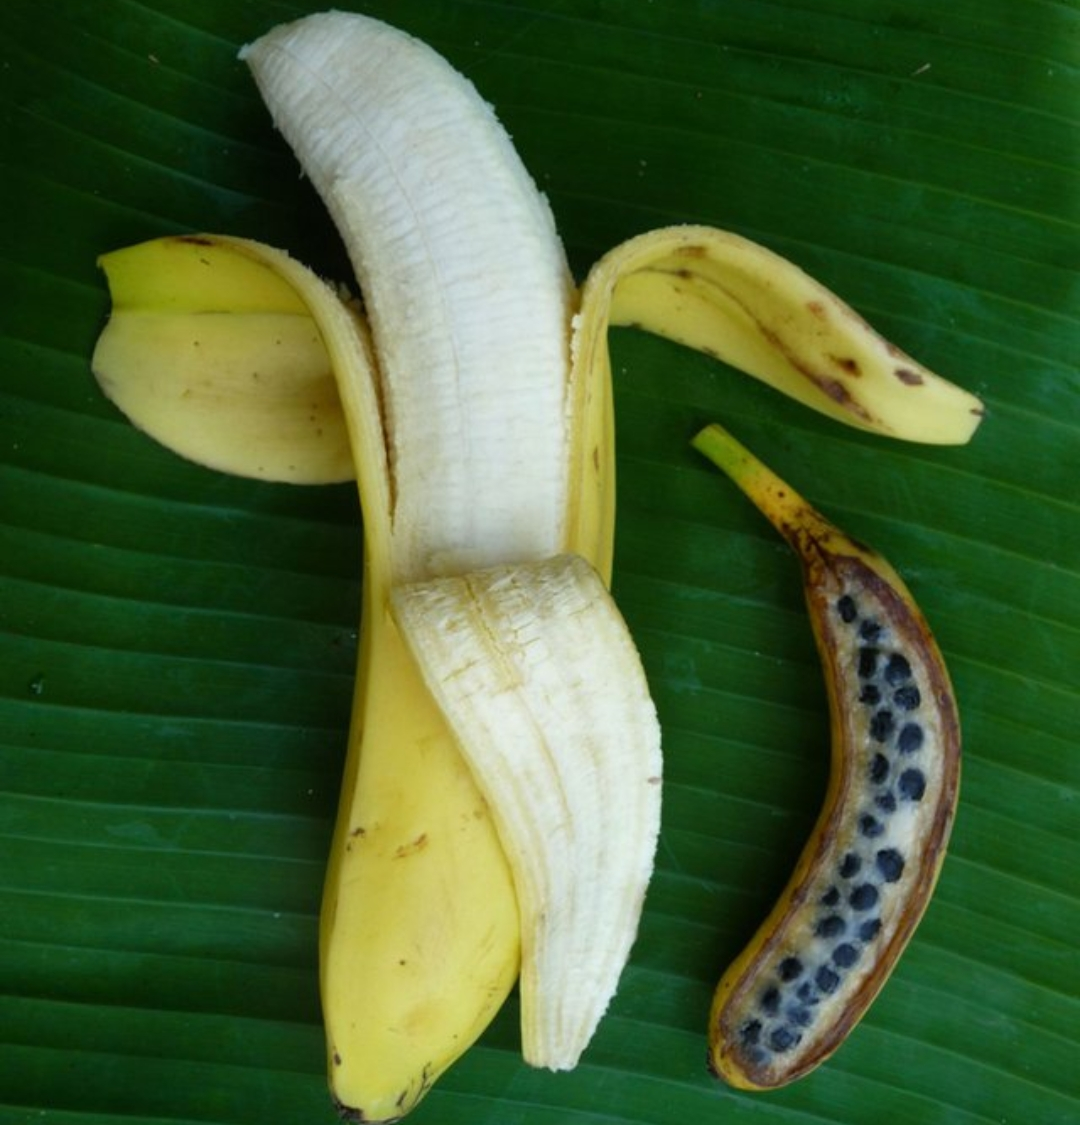 A banana peeled open next to a much smaller, half sliced banana displaying its unexpected blue and seed-filled interior